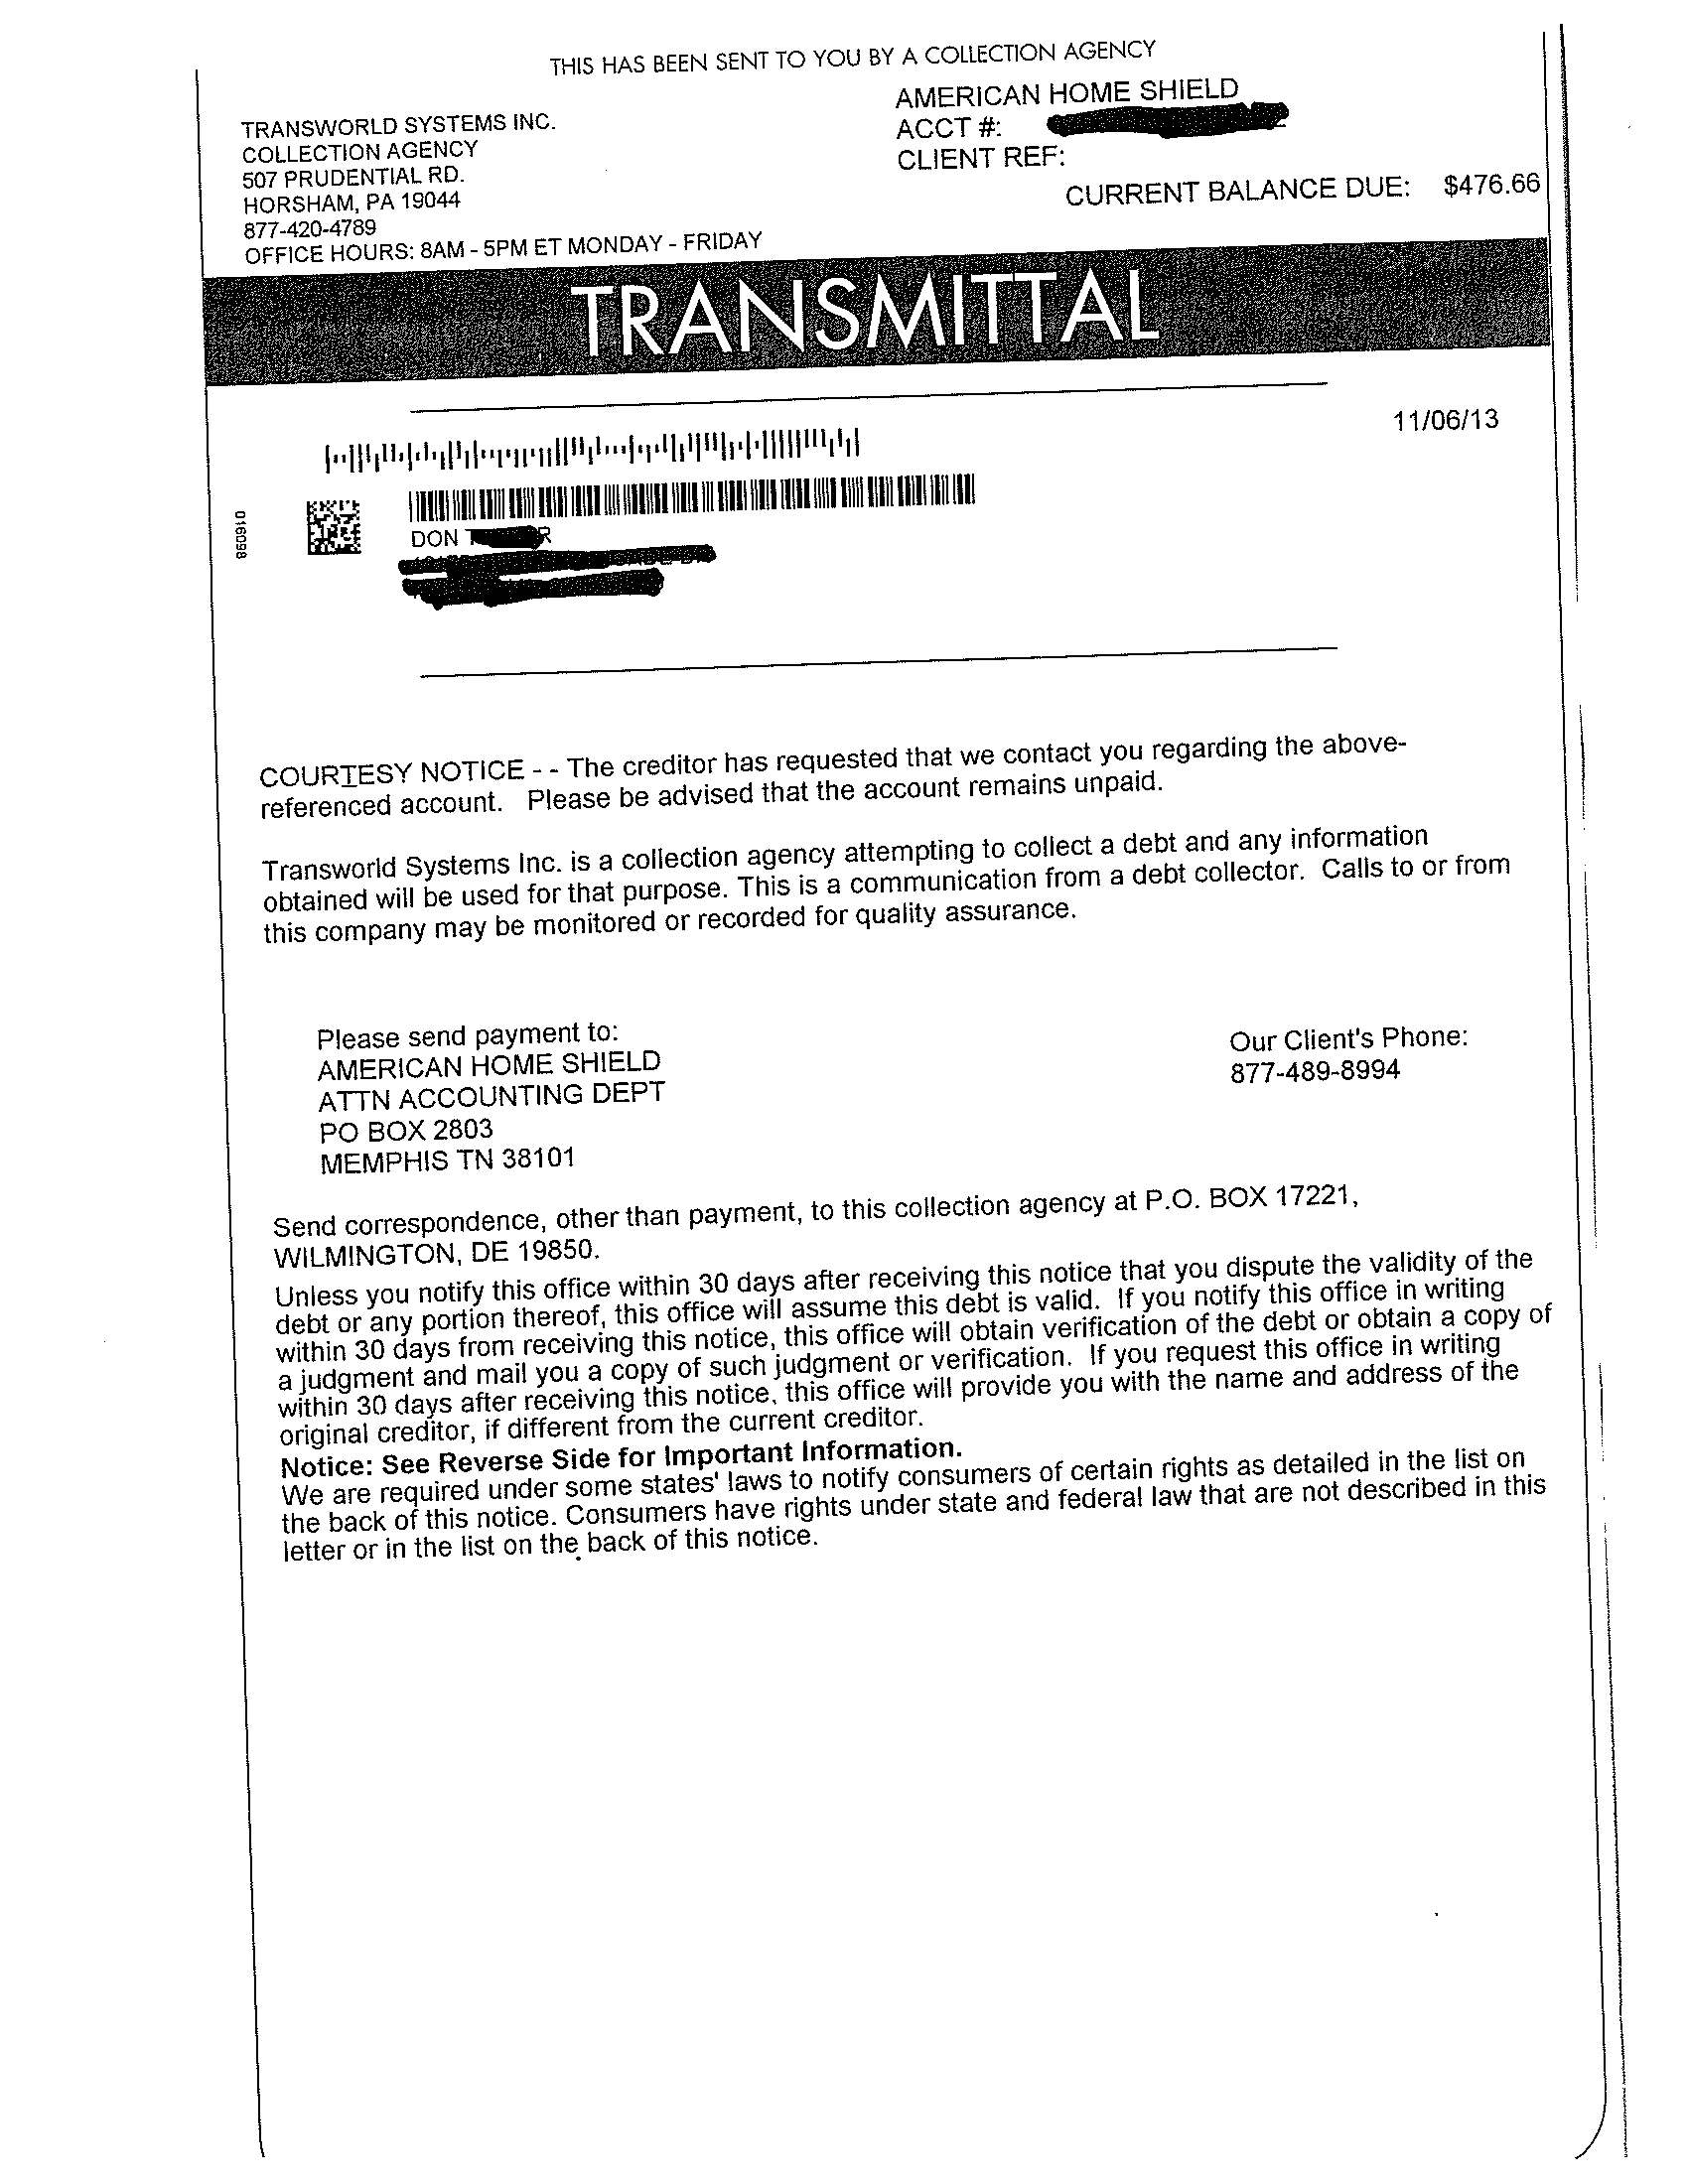 Collection letter from Transworld Systems seeking to collect on a properly closed account.